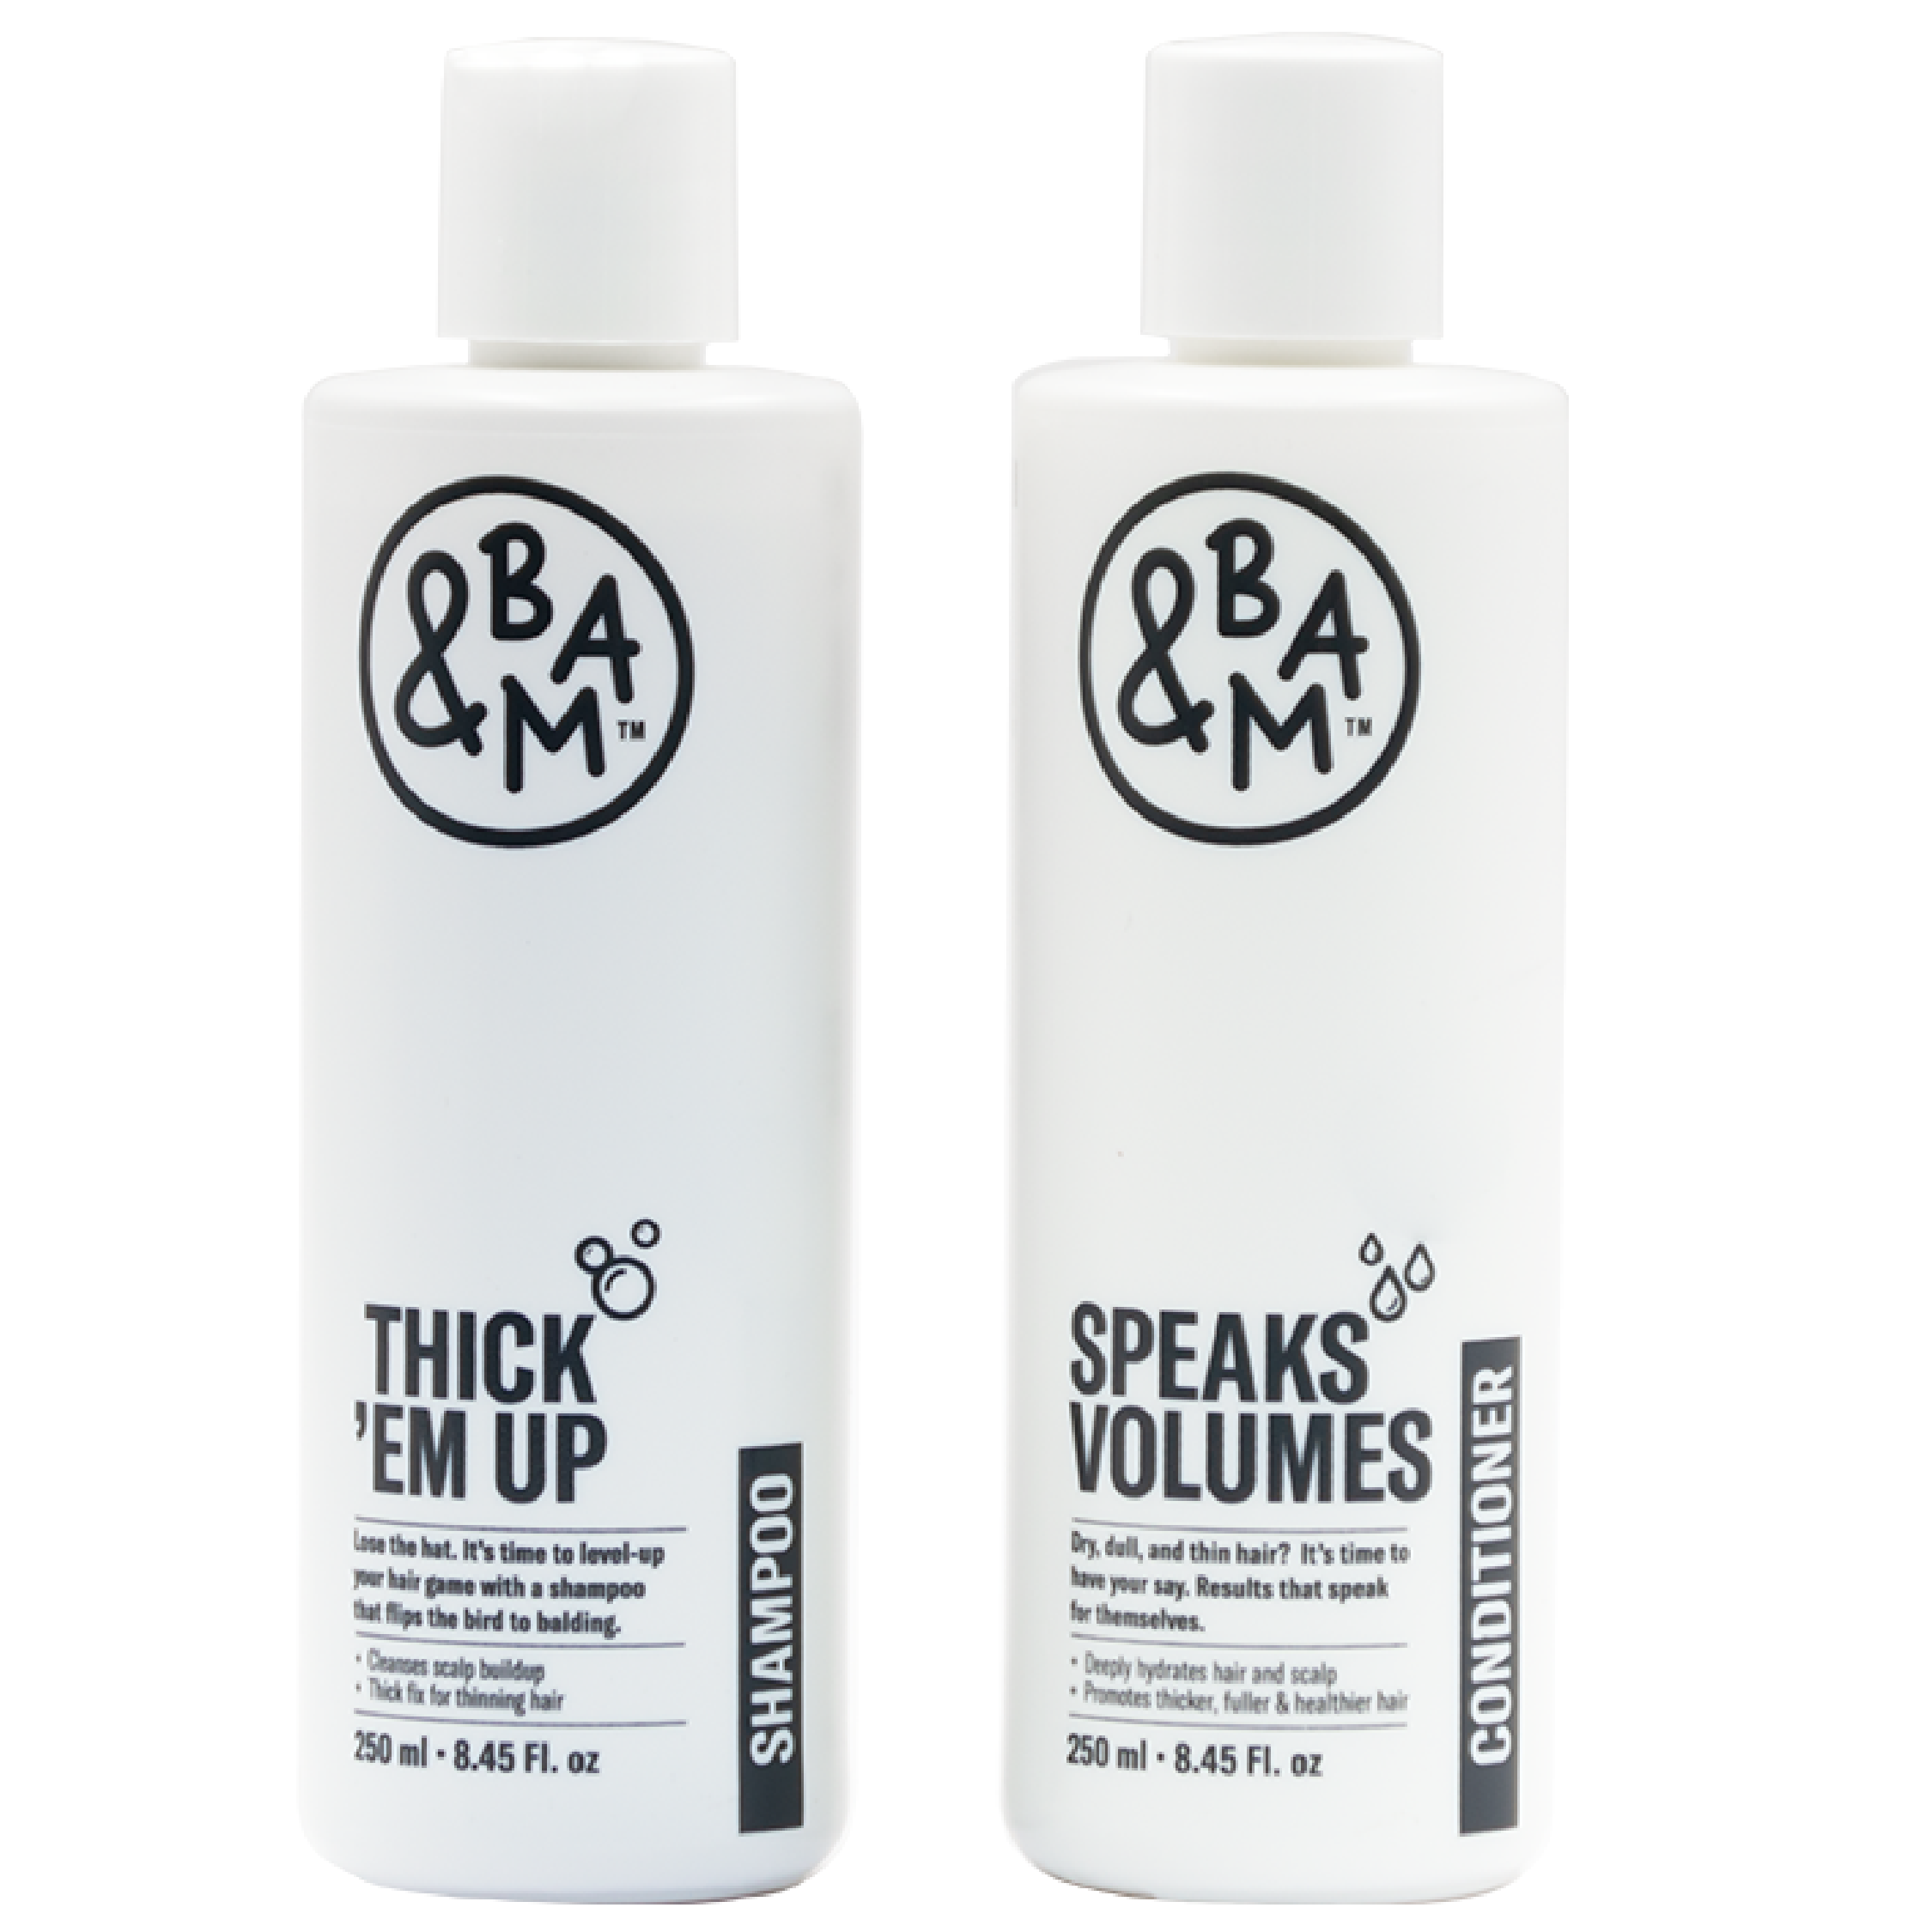 Thick 'Em Up Shampoo & Speaks Volumes Conditioner Combo